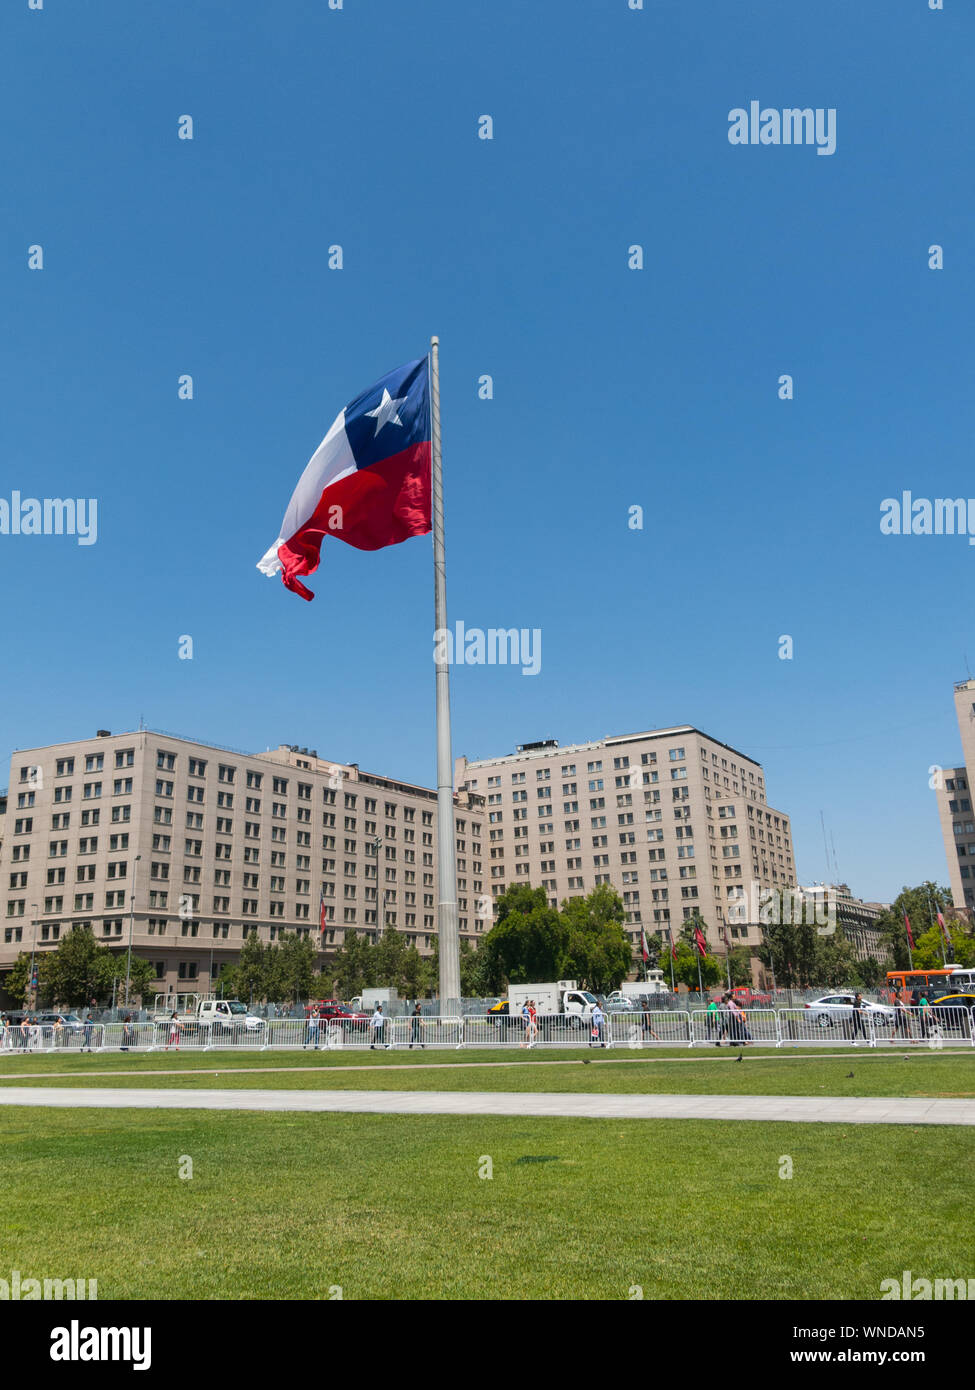 SANTIAGO DE CHILE, CHILE - JANUARY 26, 2018: Chileans walking near the giant flag on Avenida La Alameda with the citizenship Square, in downtown Santi Stock Photo